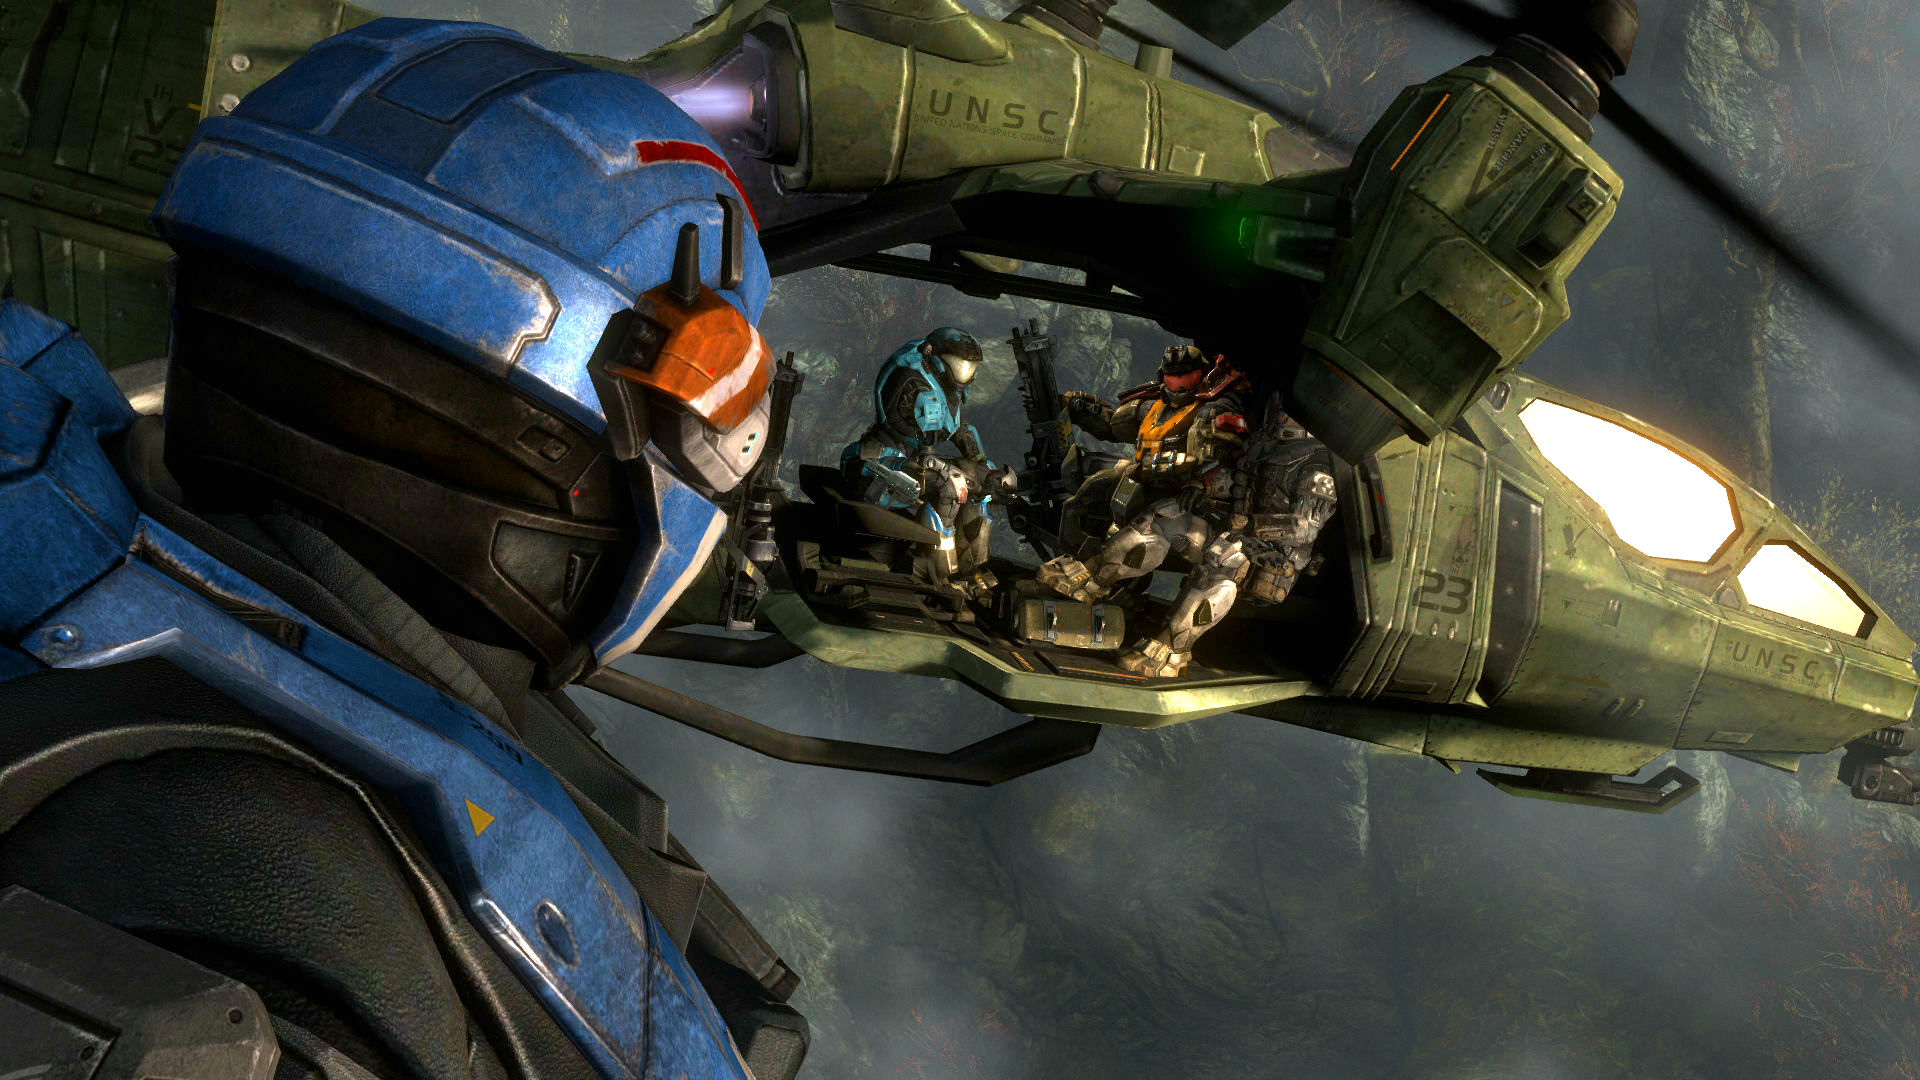 This Halo: Reach PC mod lets you fight humans in Firefight